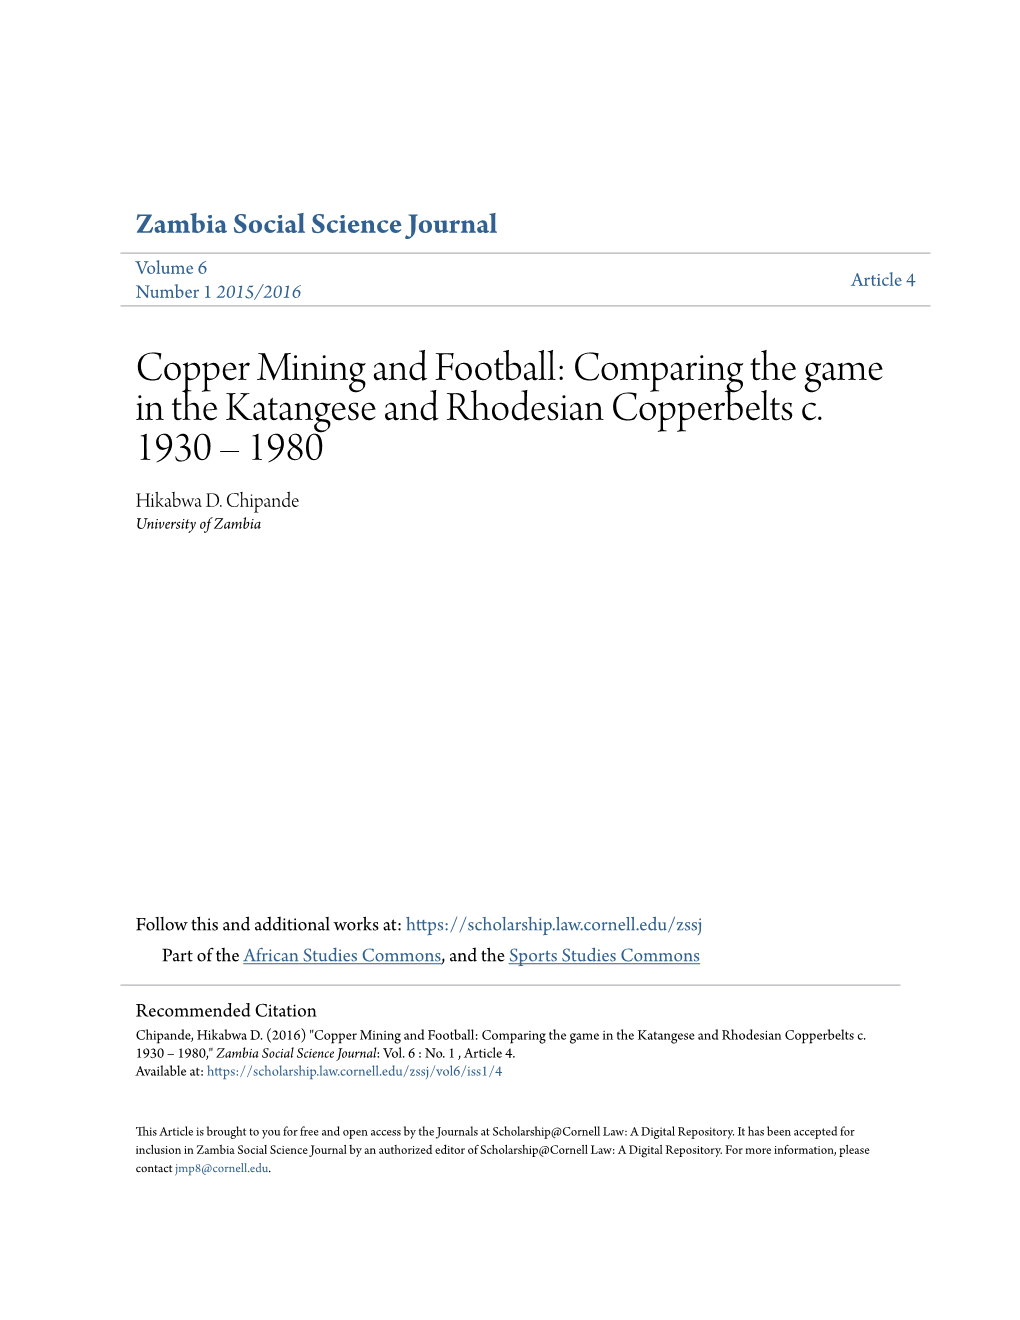 Copper Mining and Football: Comparing the Game in the Katangese and Rhodesian Copperbelts C